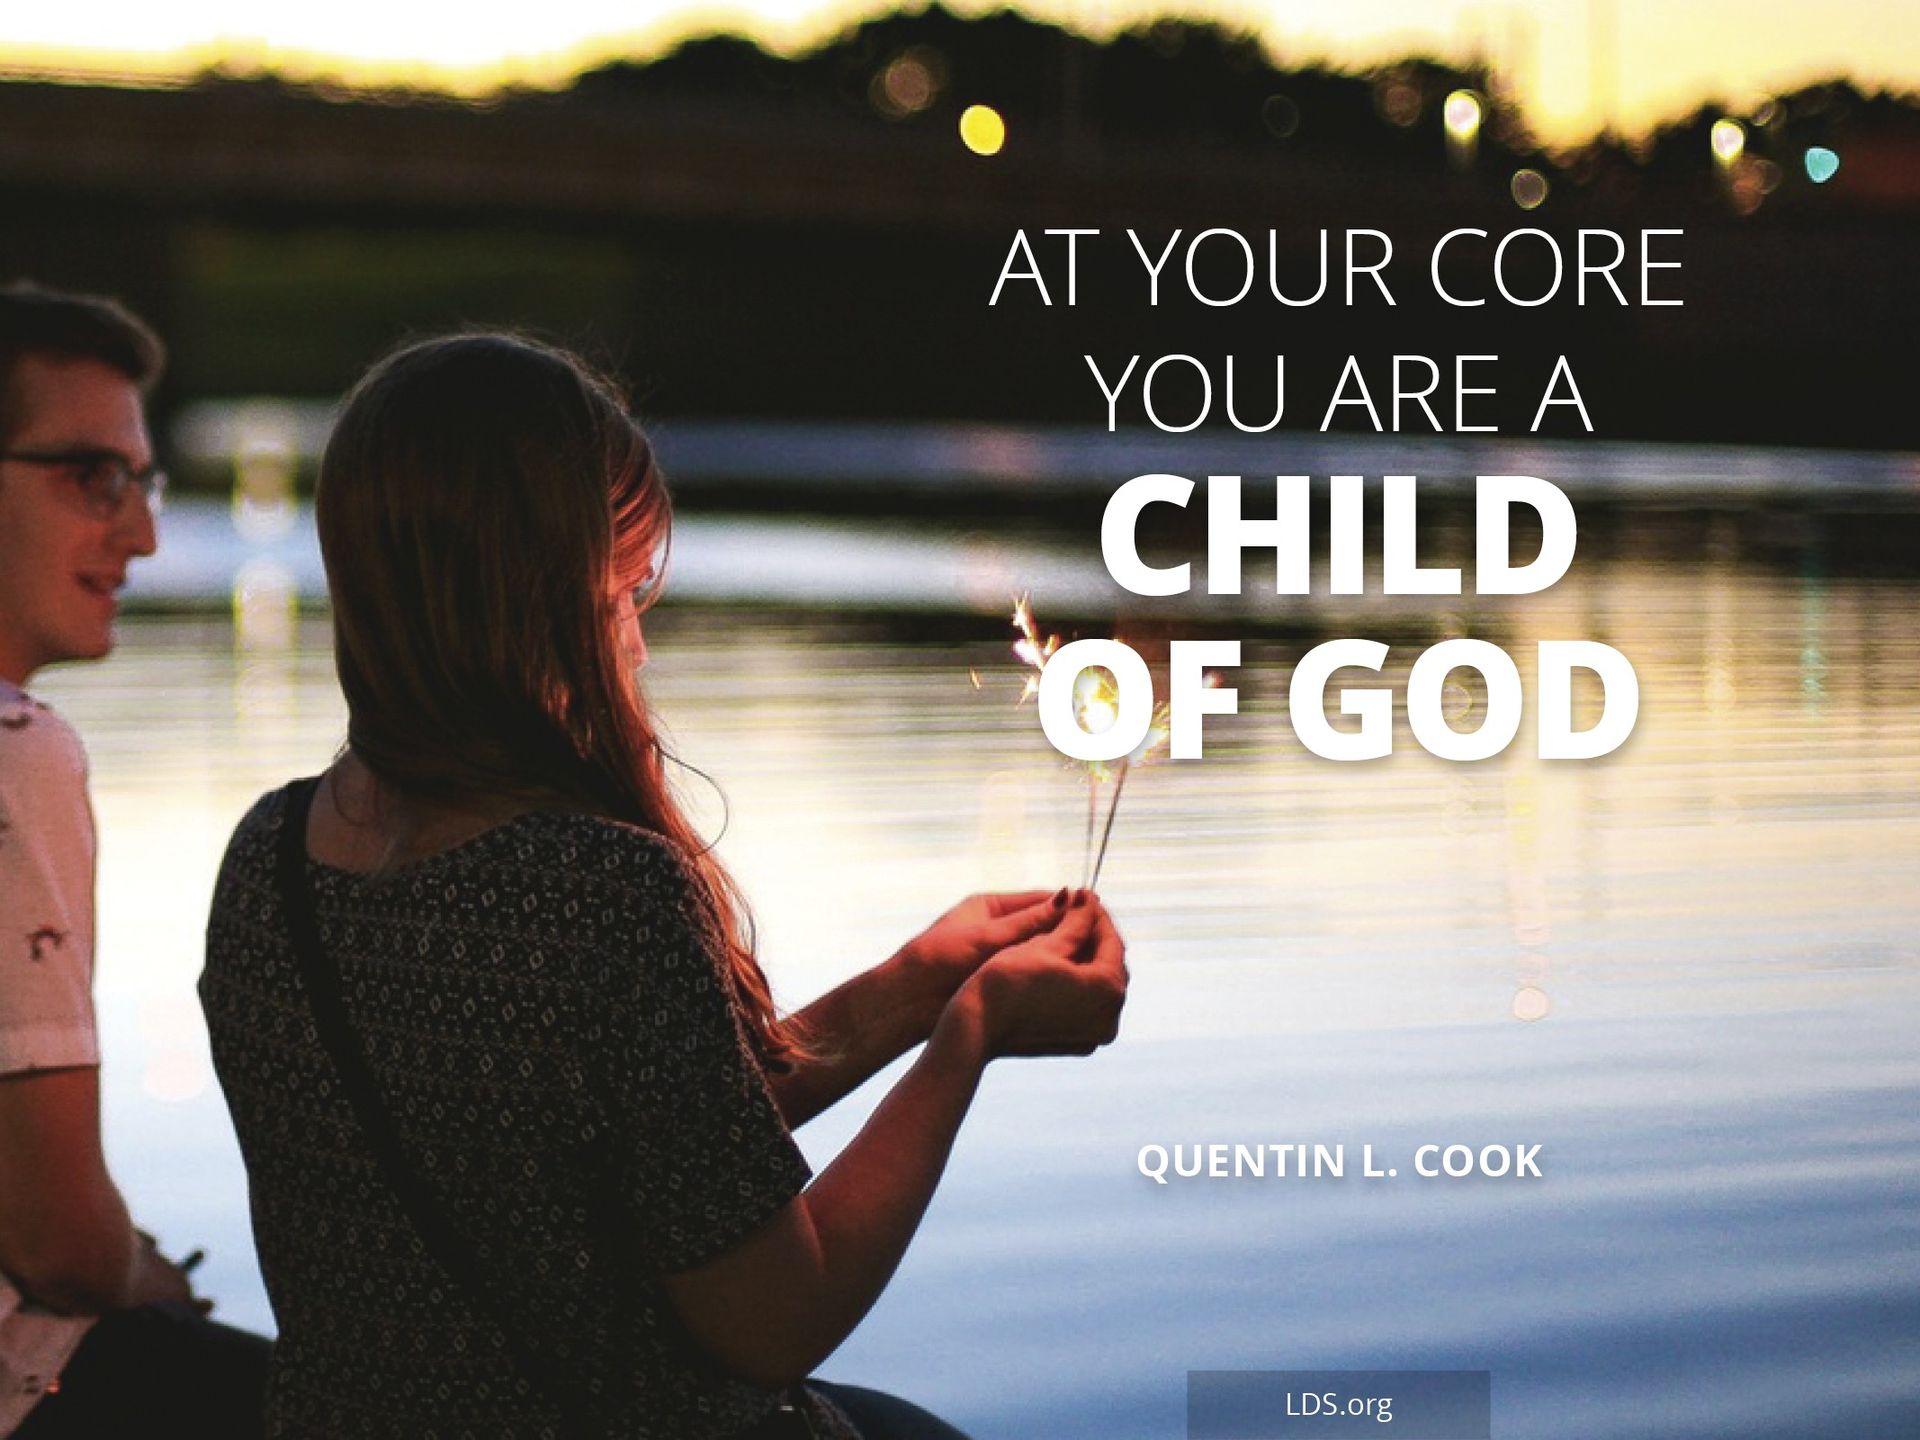 “At your core you are a child of God.”—Quentin L. Cook, “‘Fear Not … in Me Your Joy Is Full’ (D&C 101:36)”